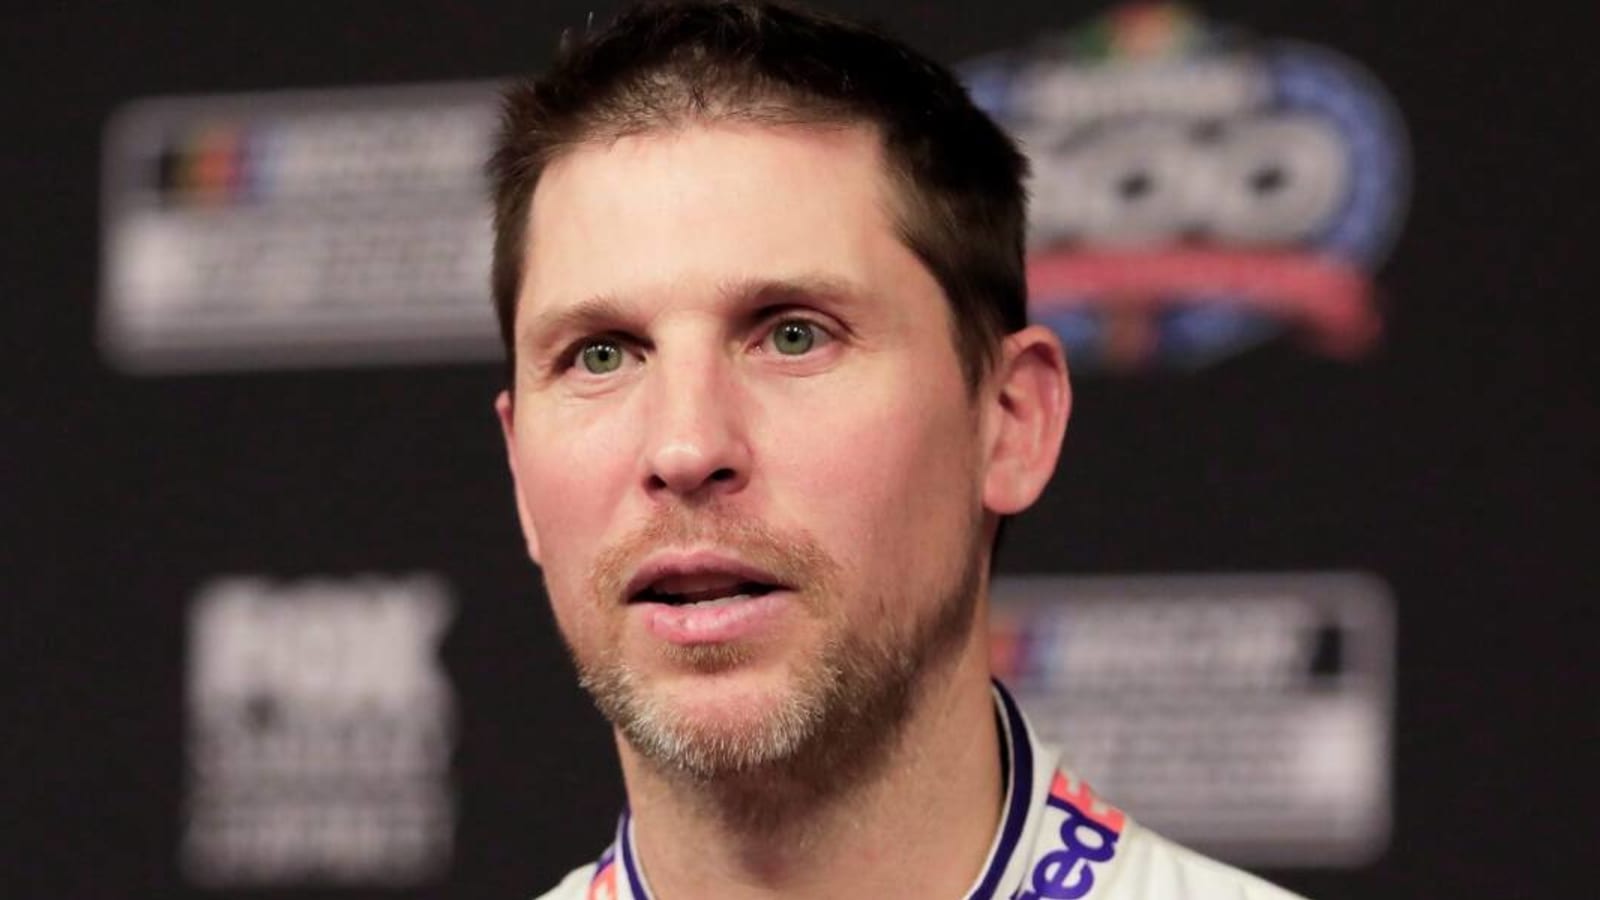 Denny Hamlin on controversy over NASCAR’s Daytona 500 final lap decision: ‘They made the right call’